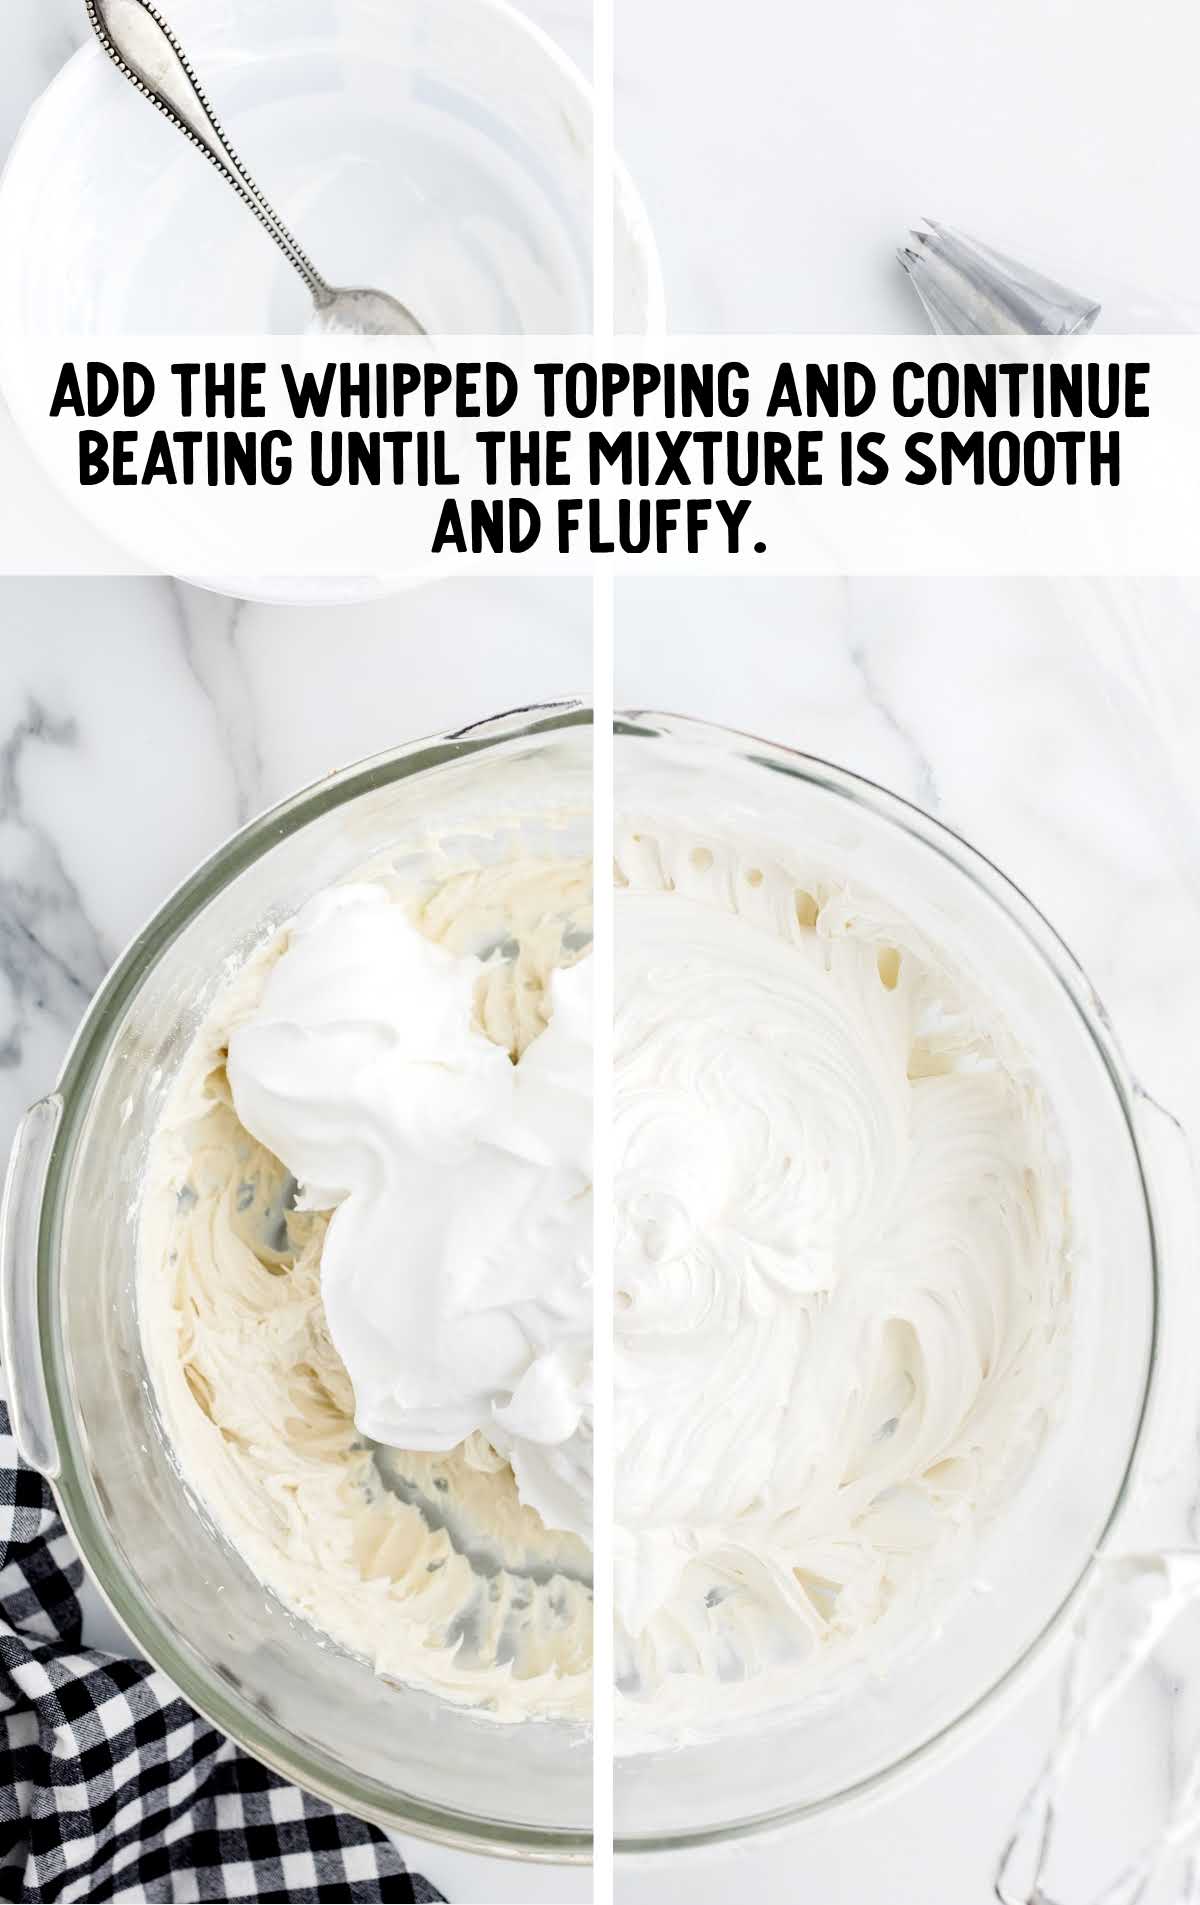 whipped topping added to the other ingredients and folded together